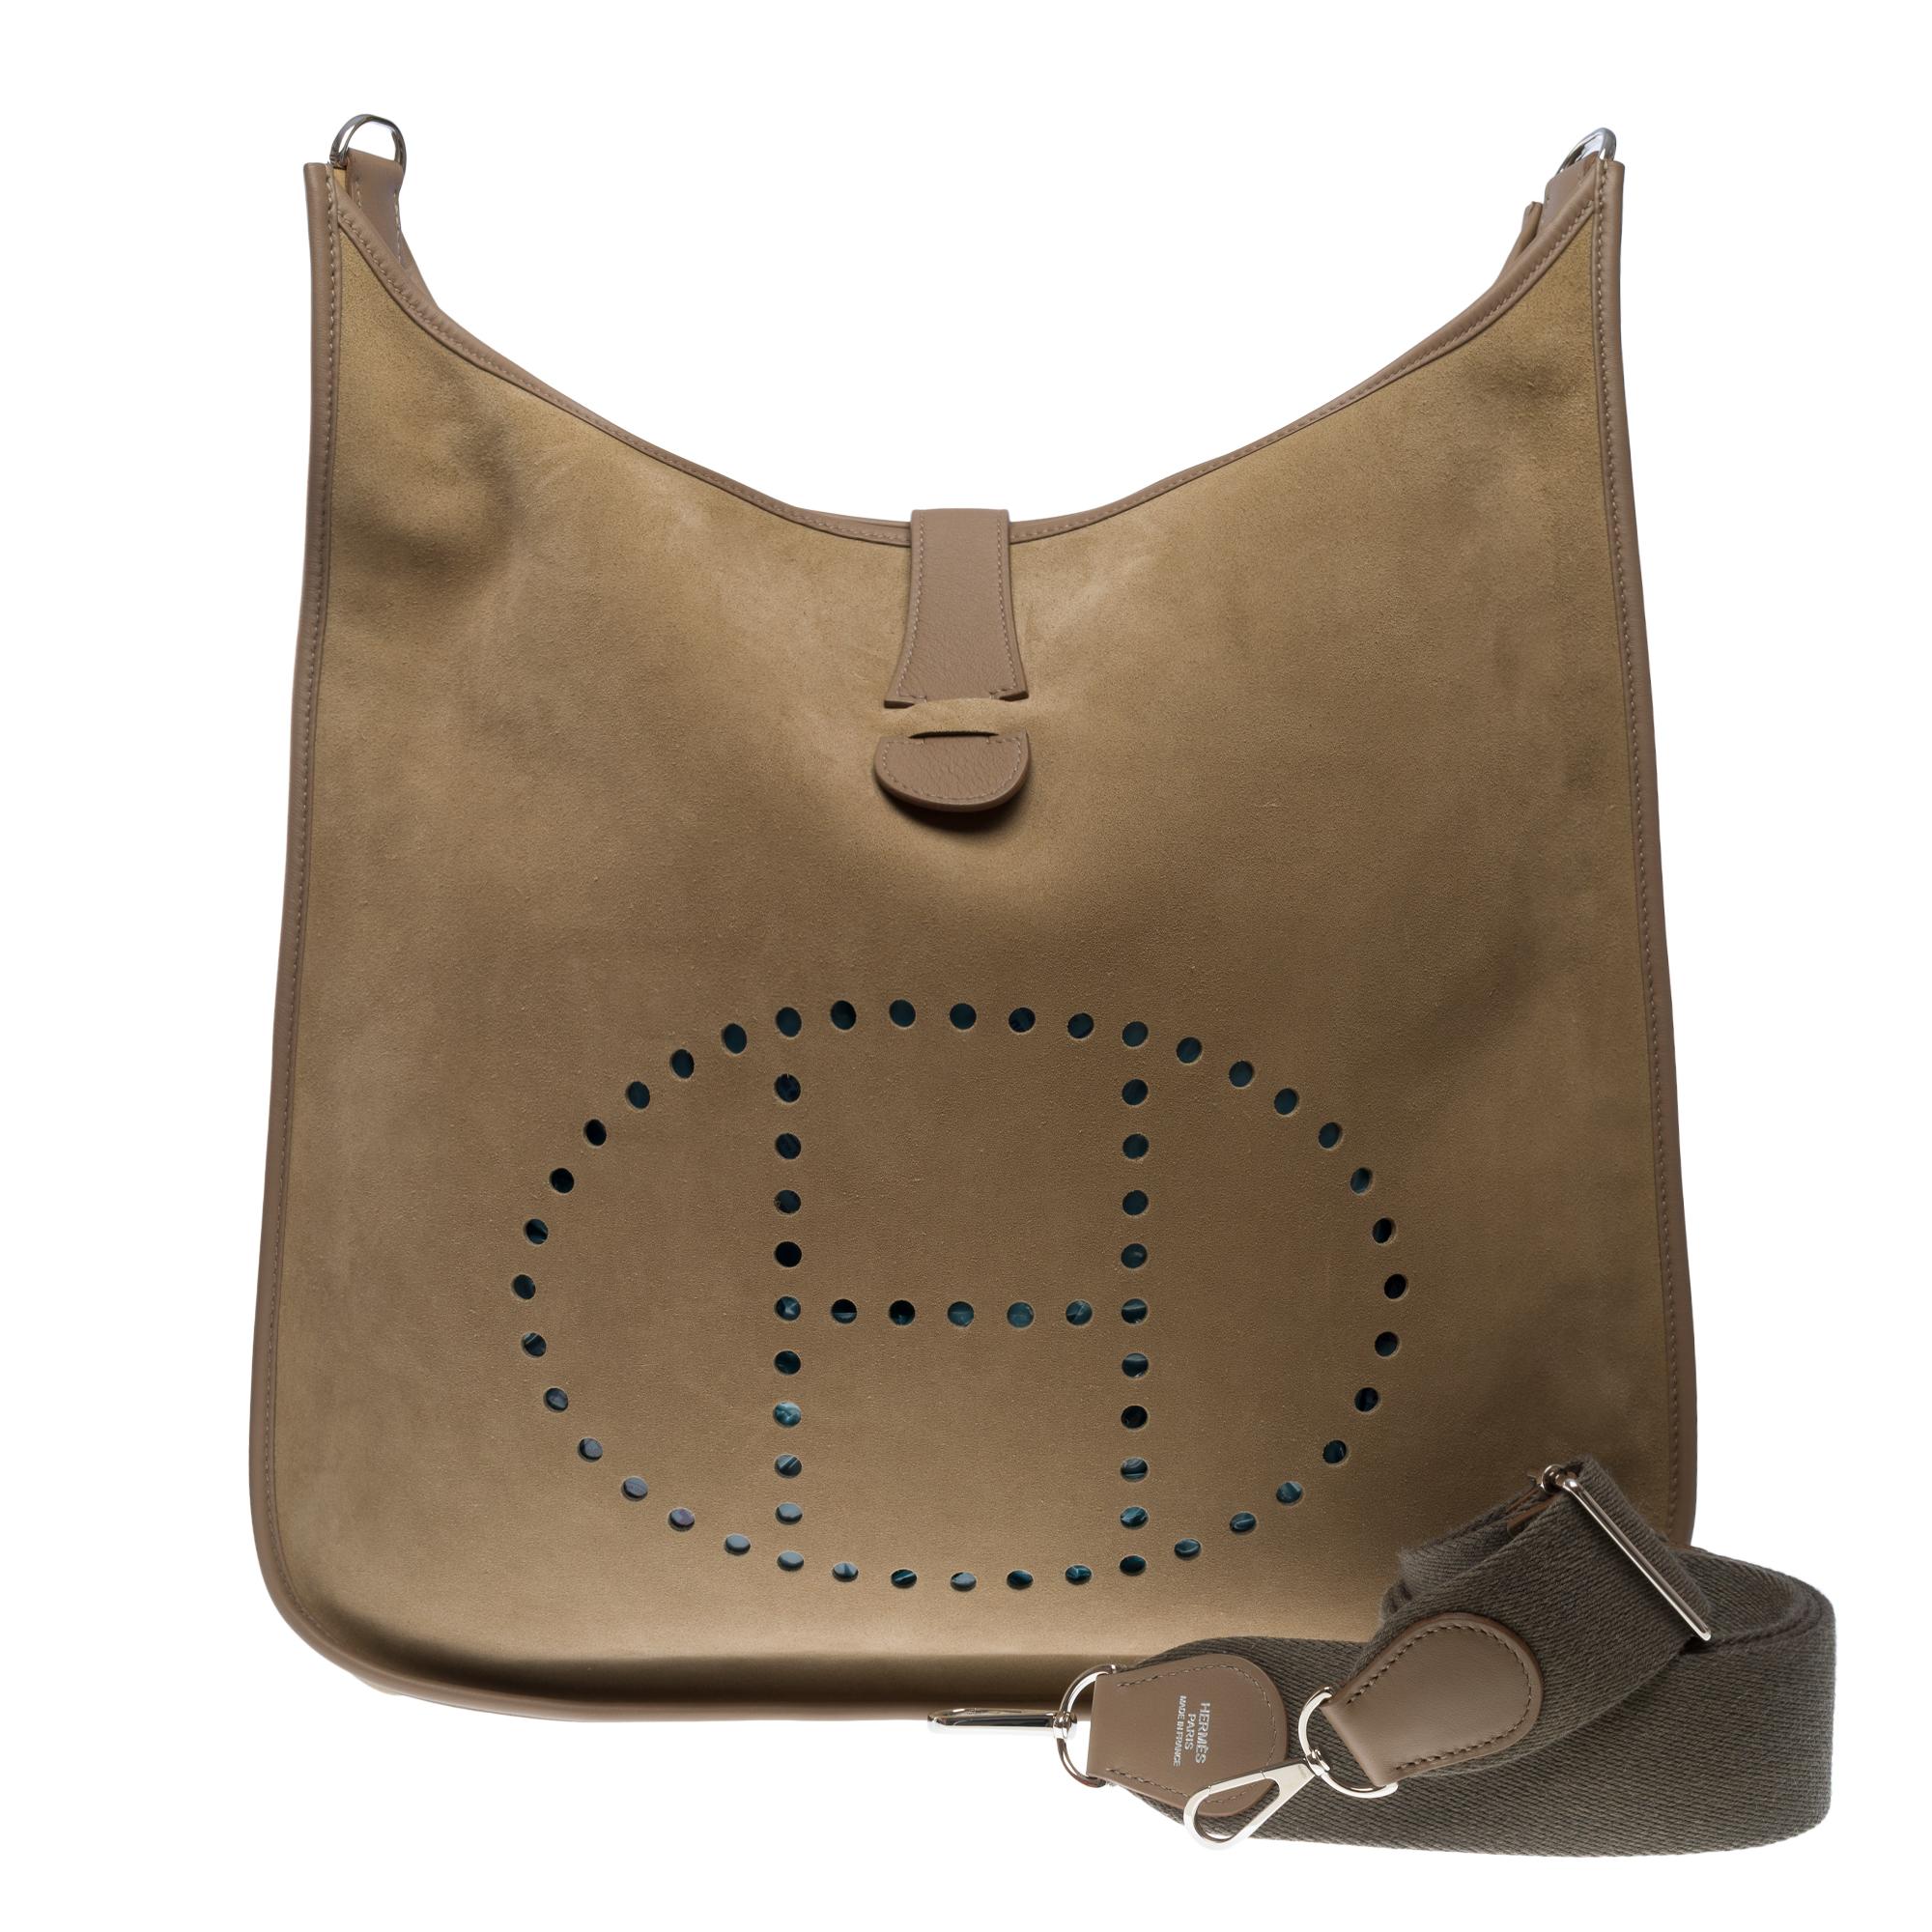 The Iconic & Very Rare Hermes Evelyne TGM shoulder bag in étoupe Doblis Suede, palladium silver metal hardware, a removable adjustable shoulder strap in gray canvas allowing a shoulder or crossbody carry

A patch pocket on the back of the bag
Snap